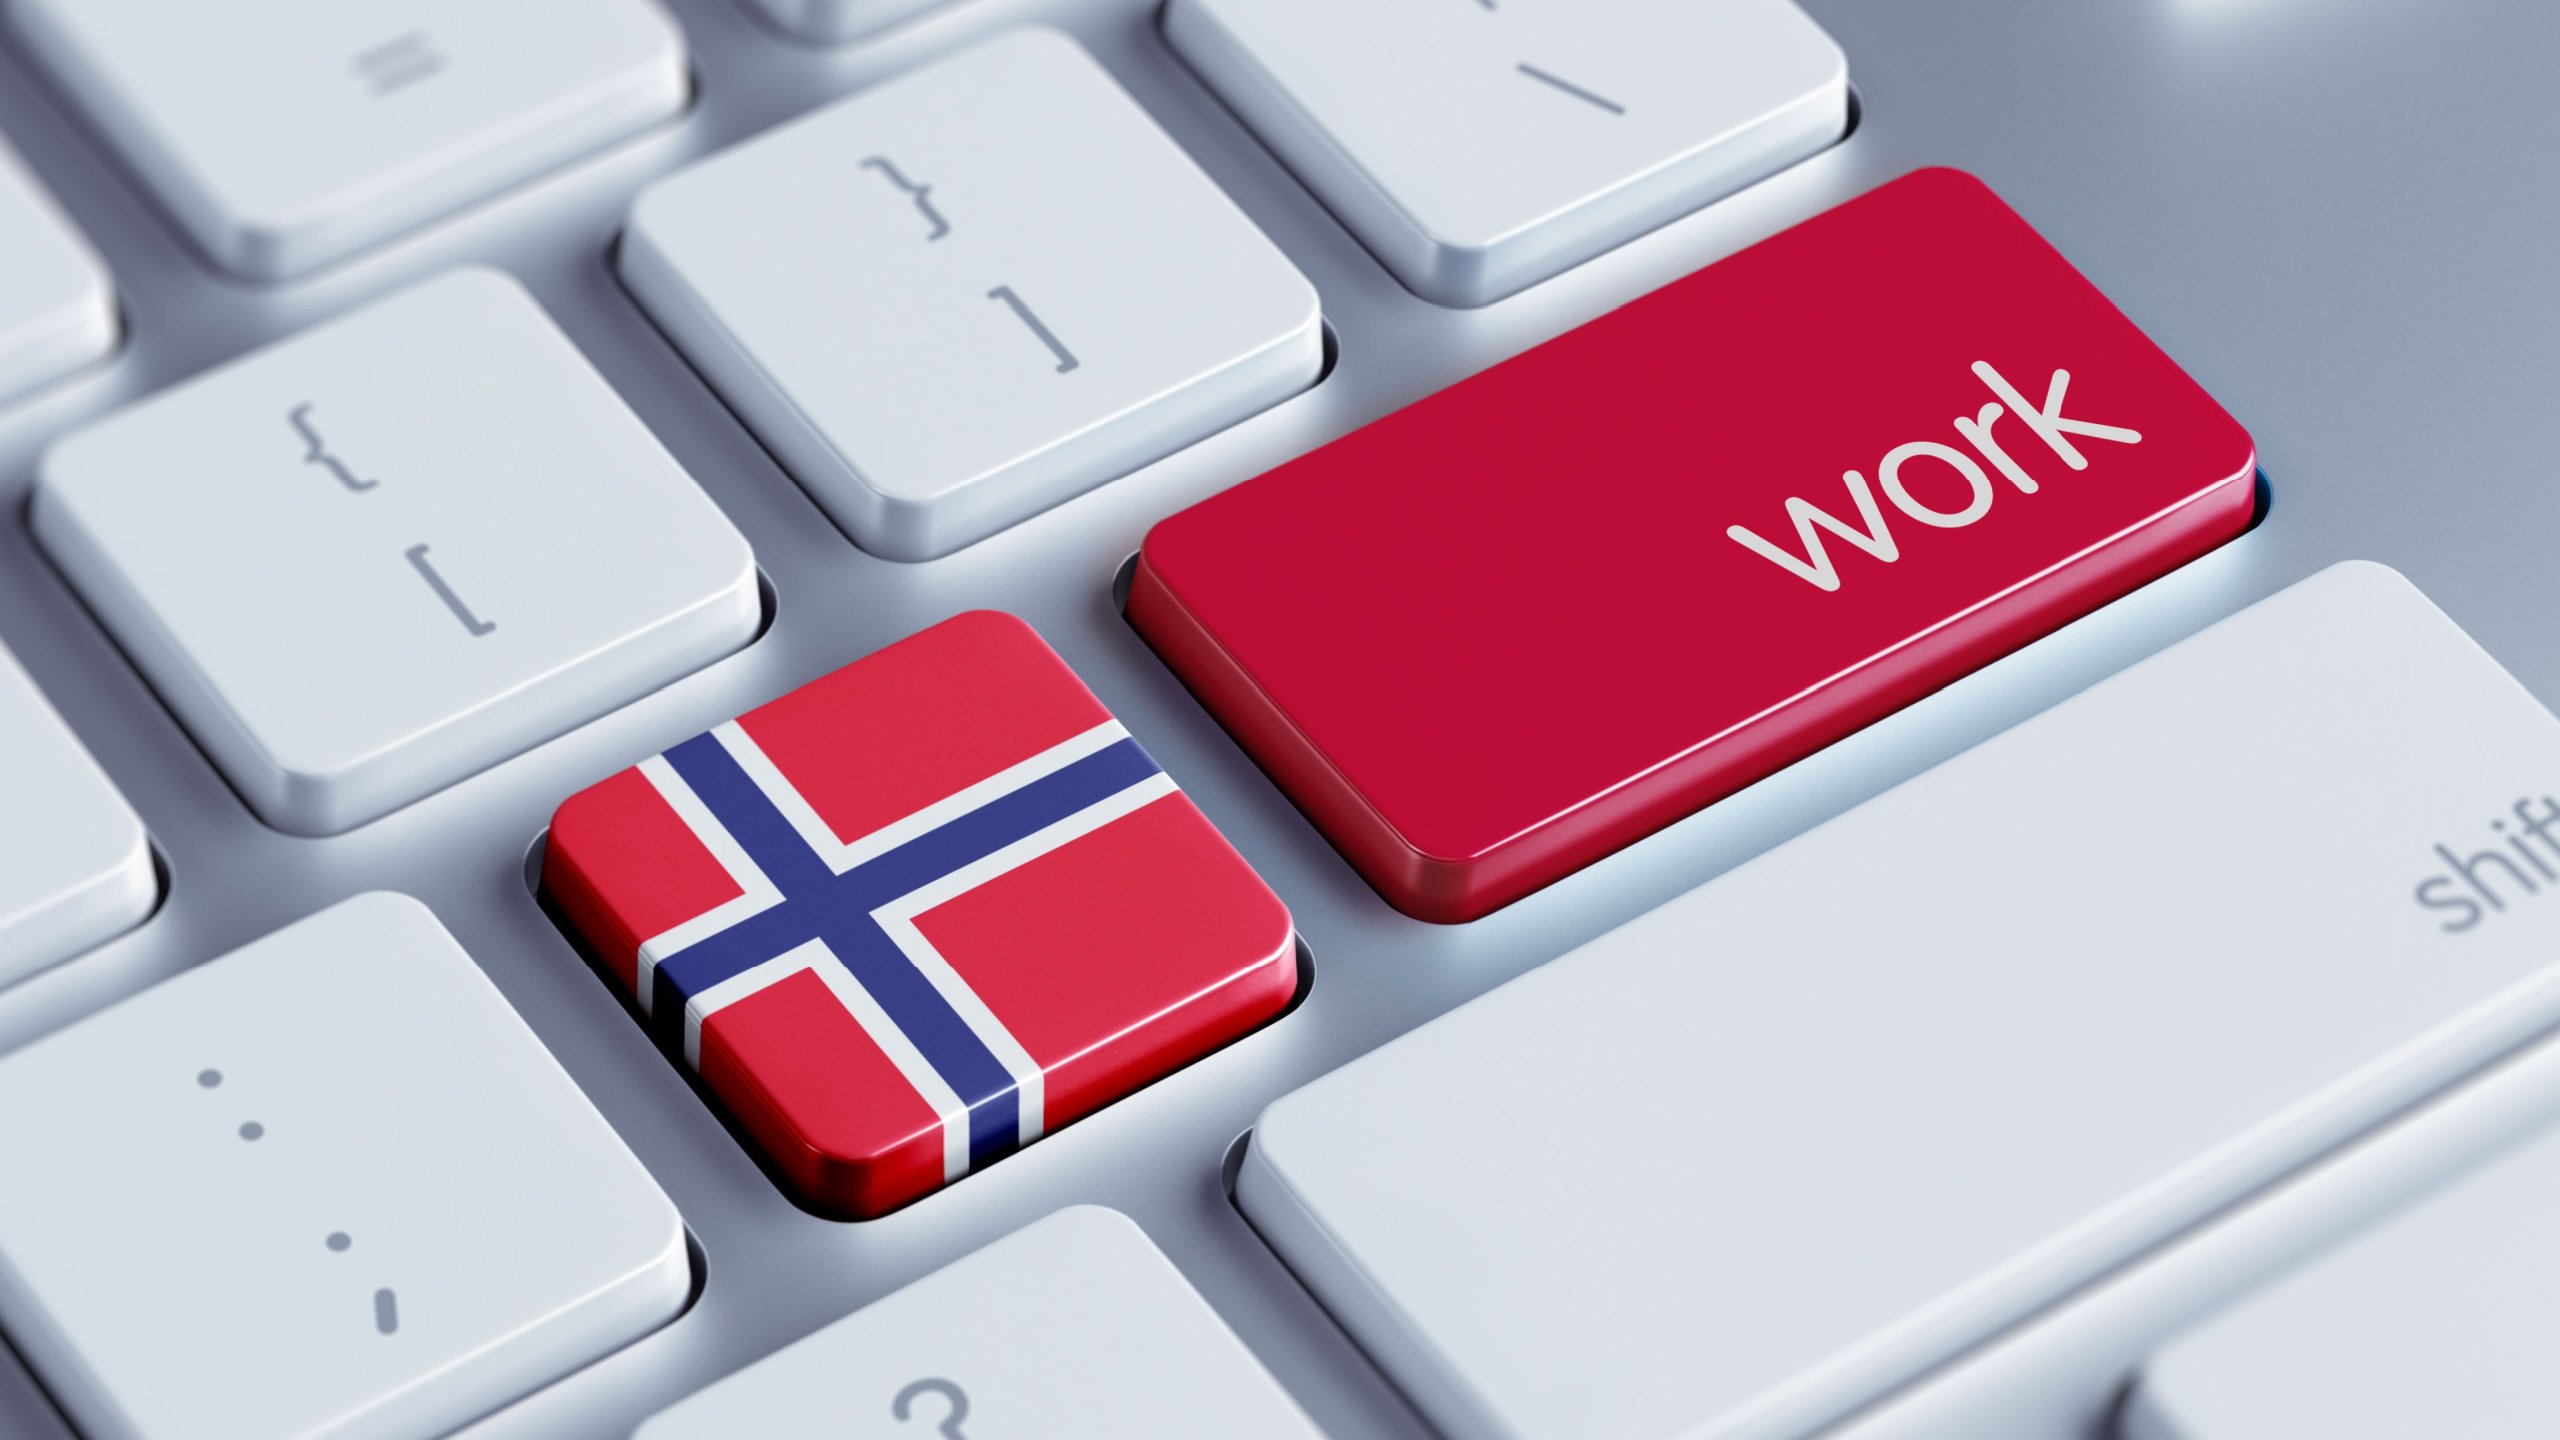 Podcast 72: Overcoming Hurdles to Find Work in Norway